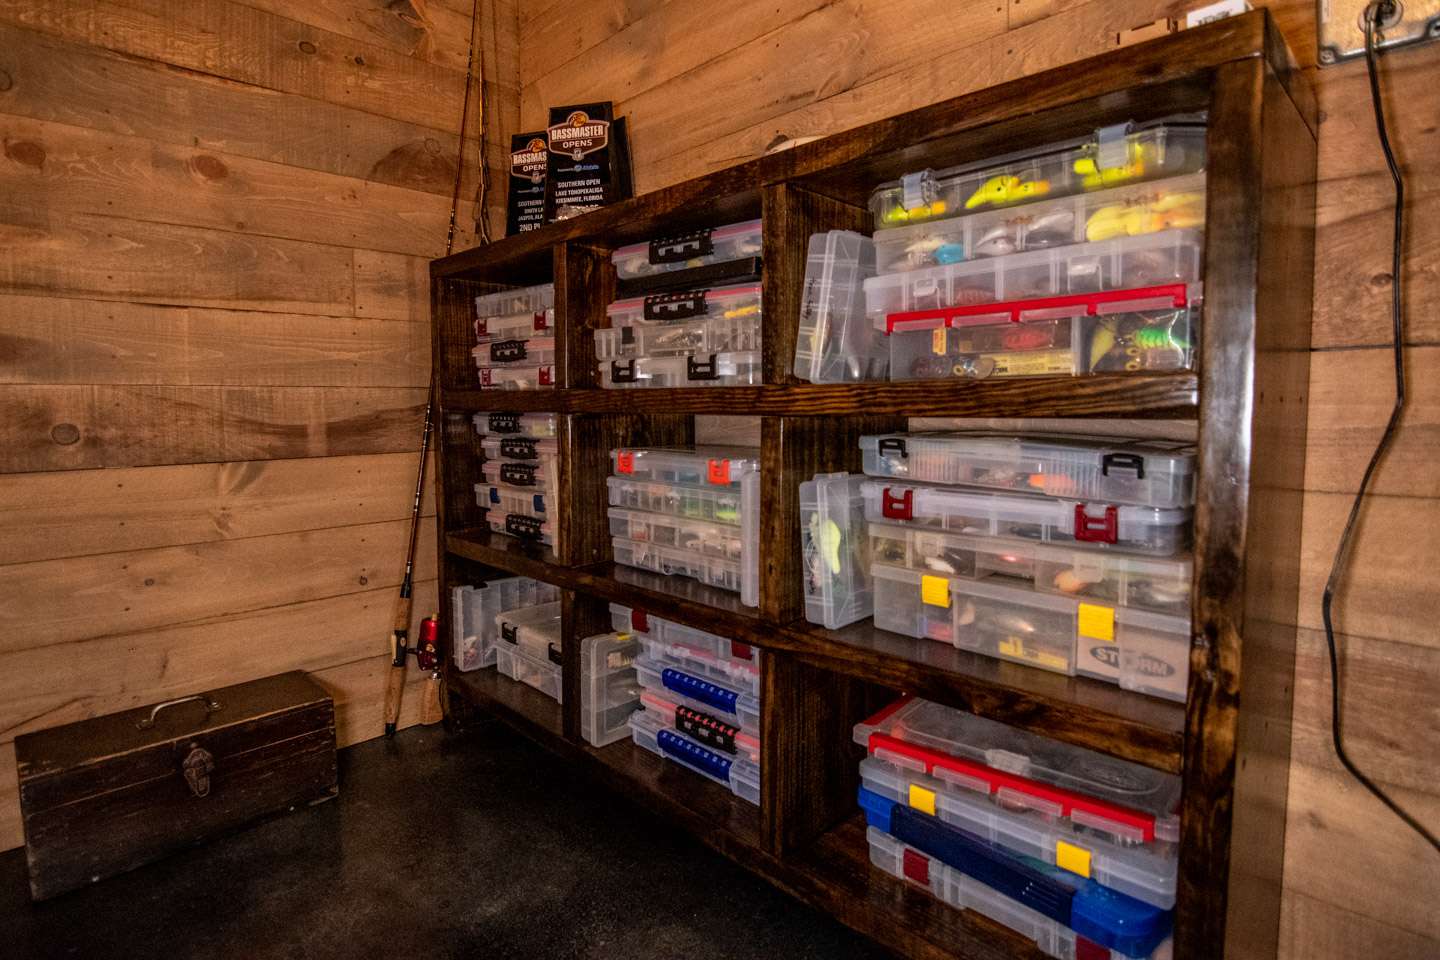 A bookshelf sitting next to the glass case is stocked with tackleboxes filled with more crankbaits and top water lures.  